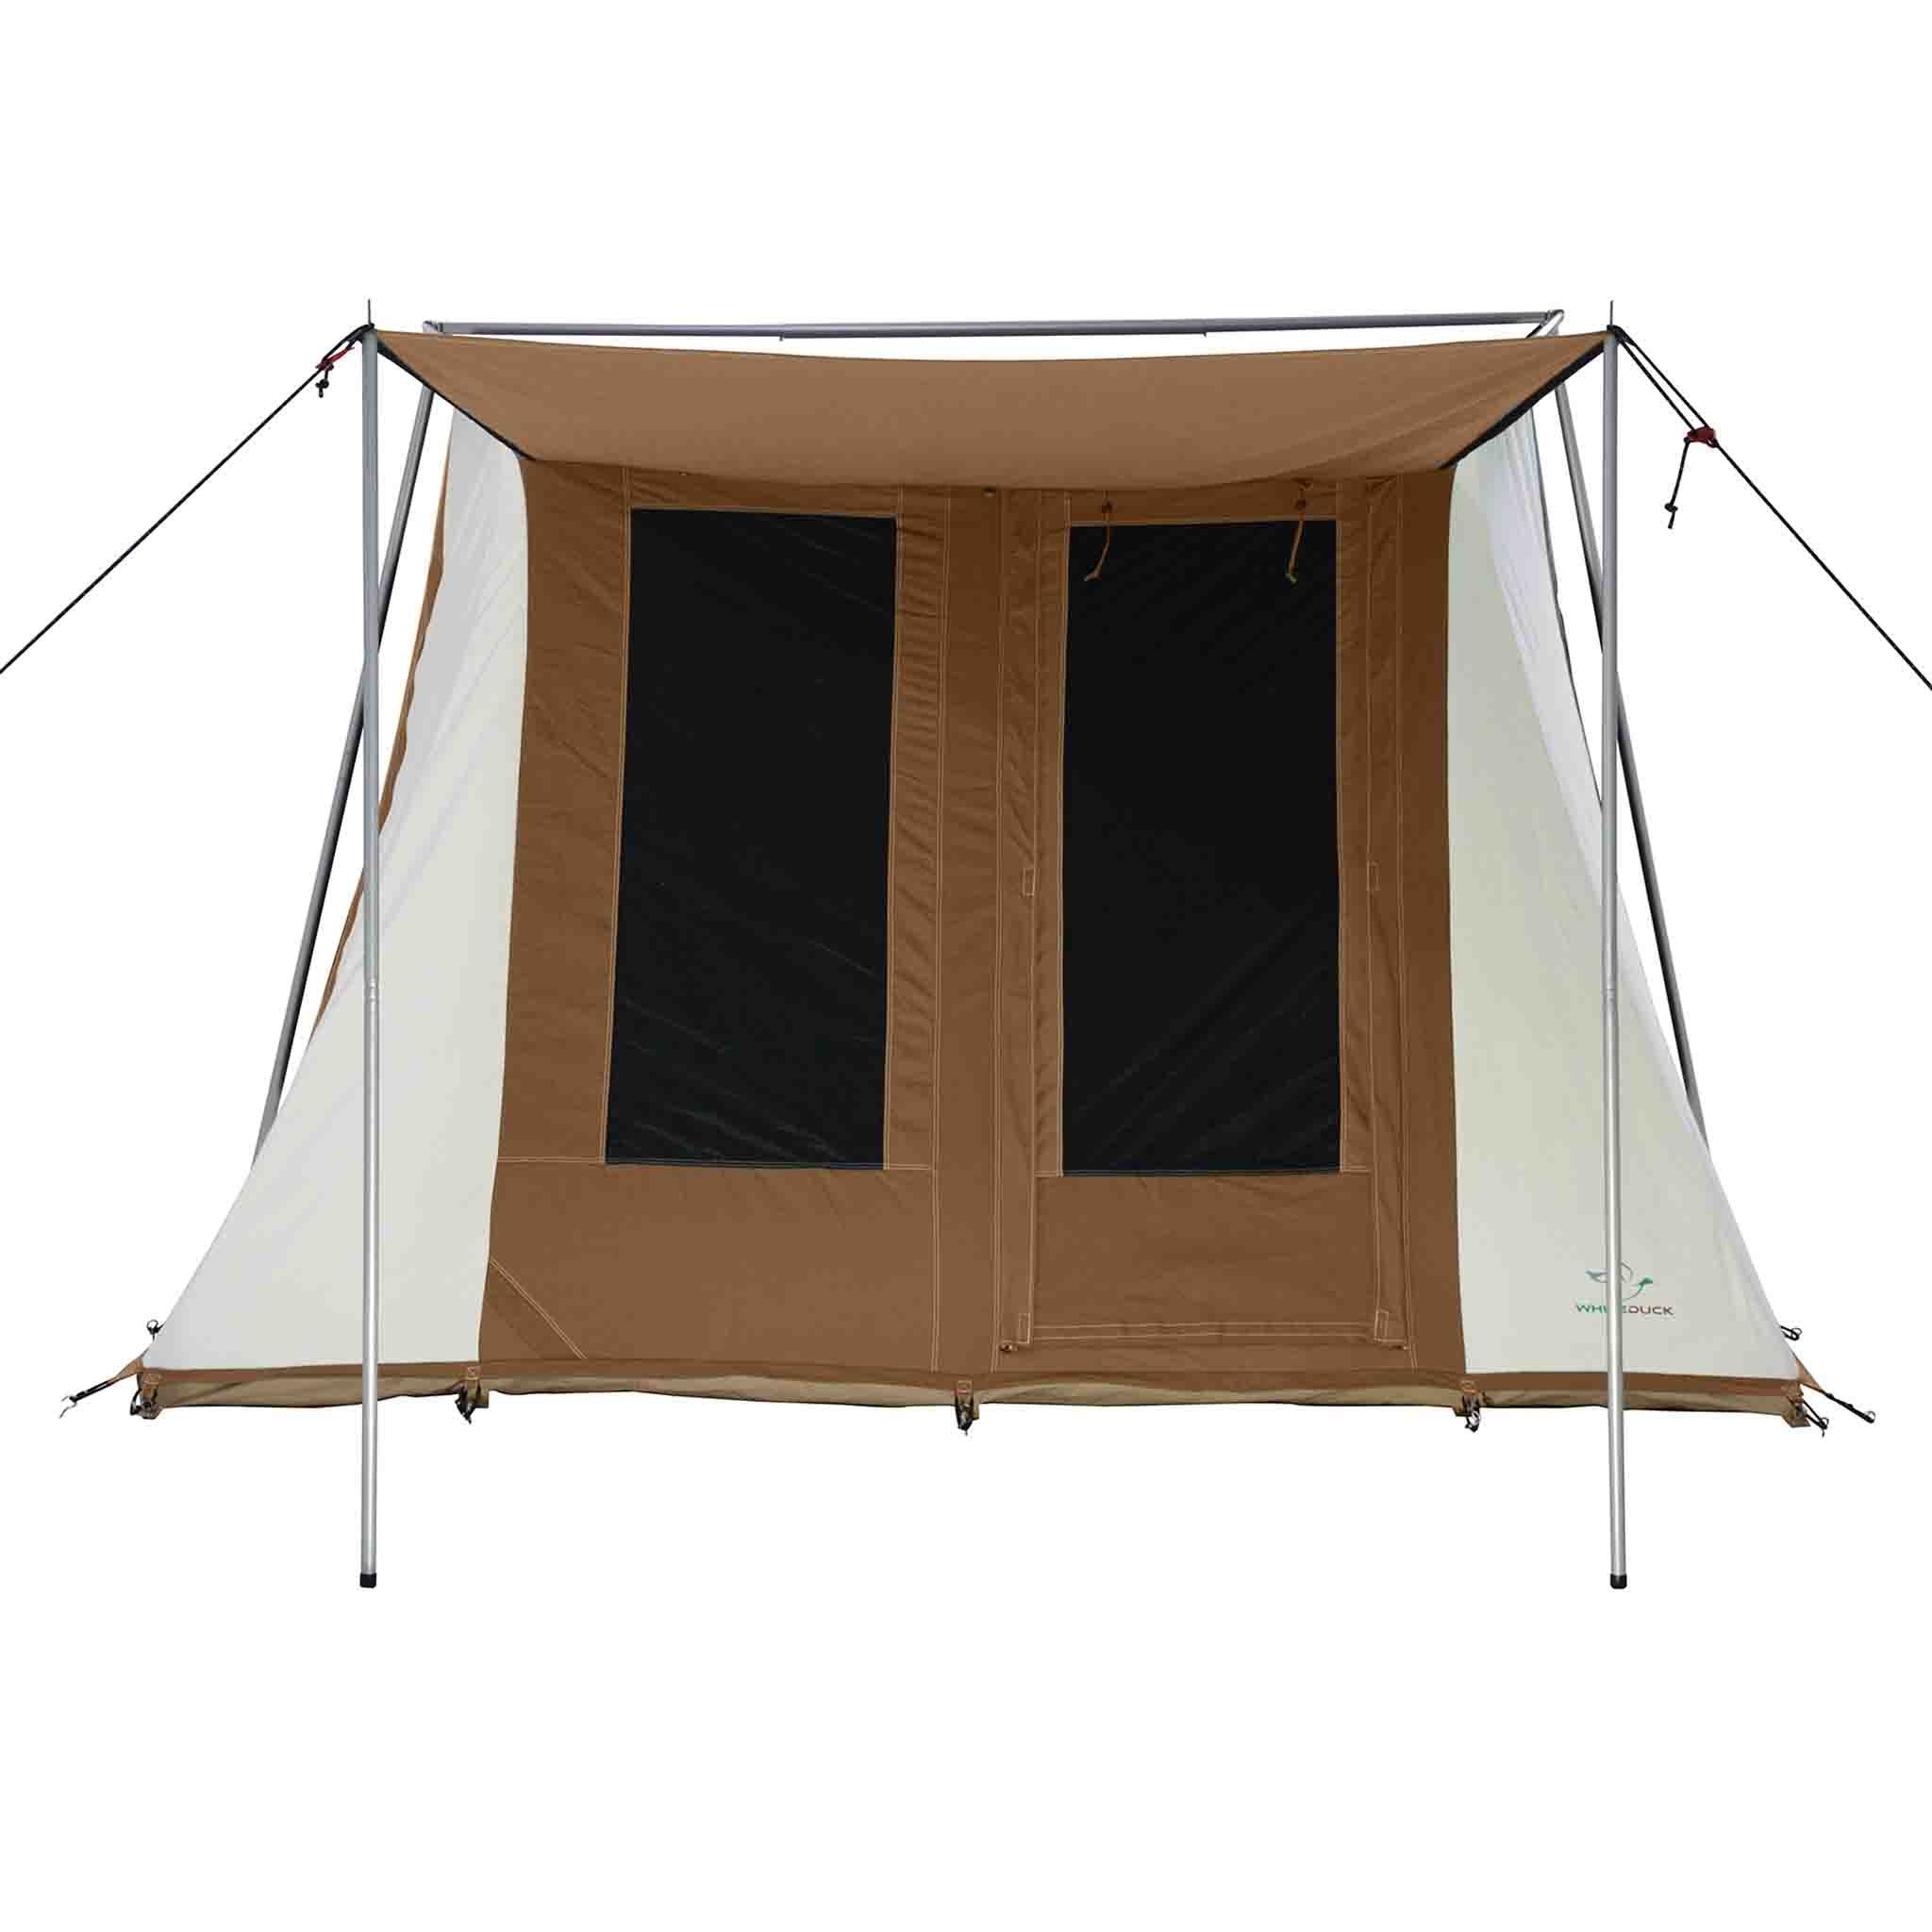 Canvas Tents for Sale  Wall, Bell & Cabin Tents For Camping